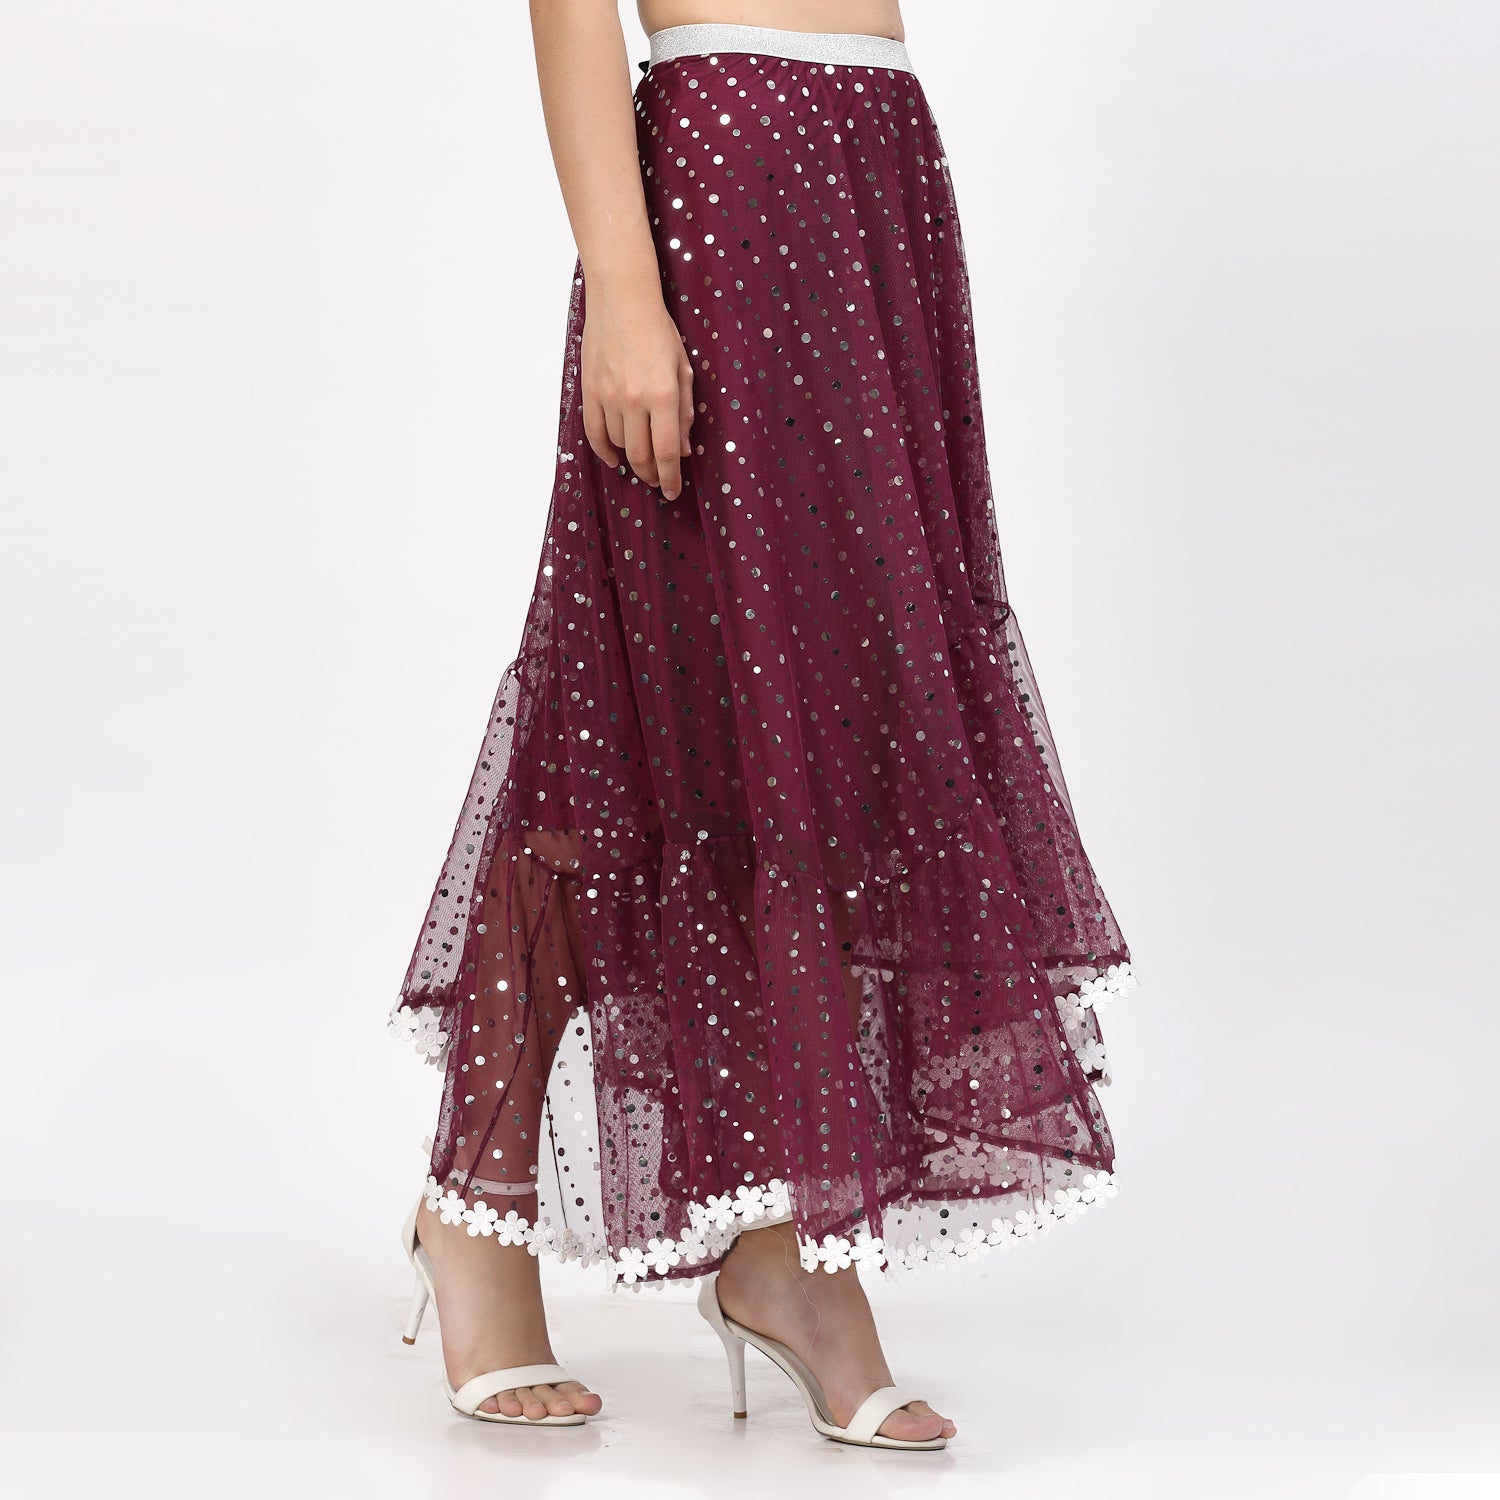 Purple Net Asymmetrical Skirt With Sequins And Lace